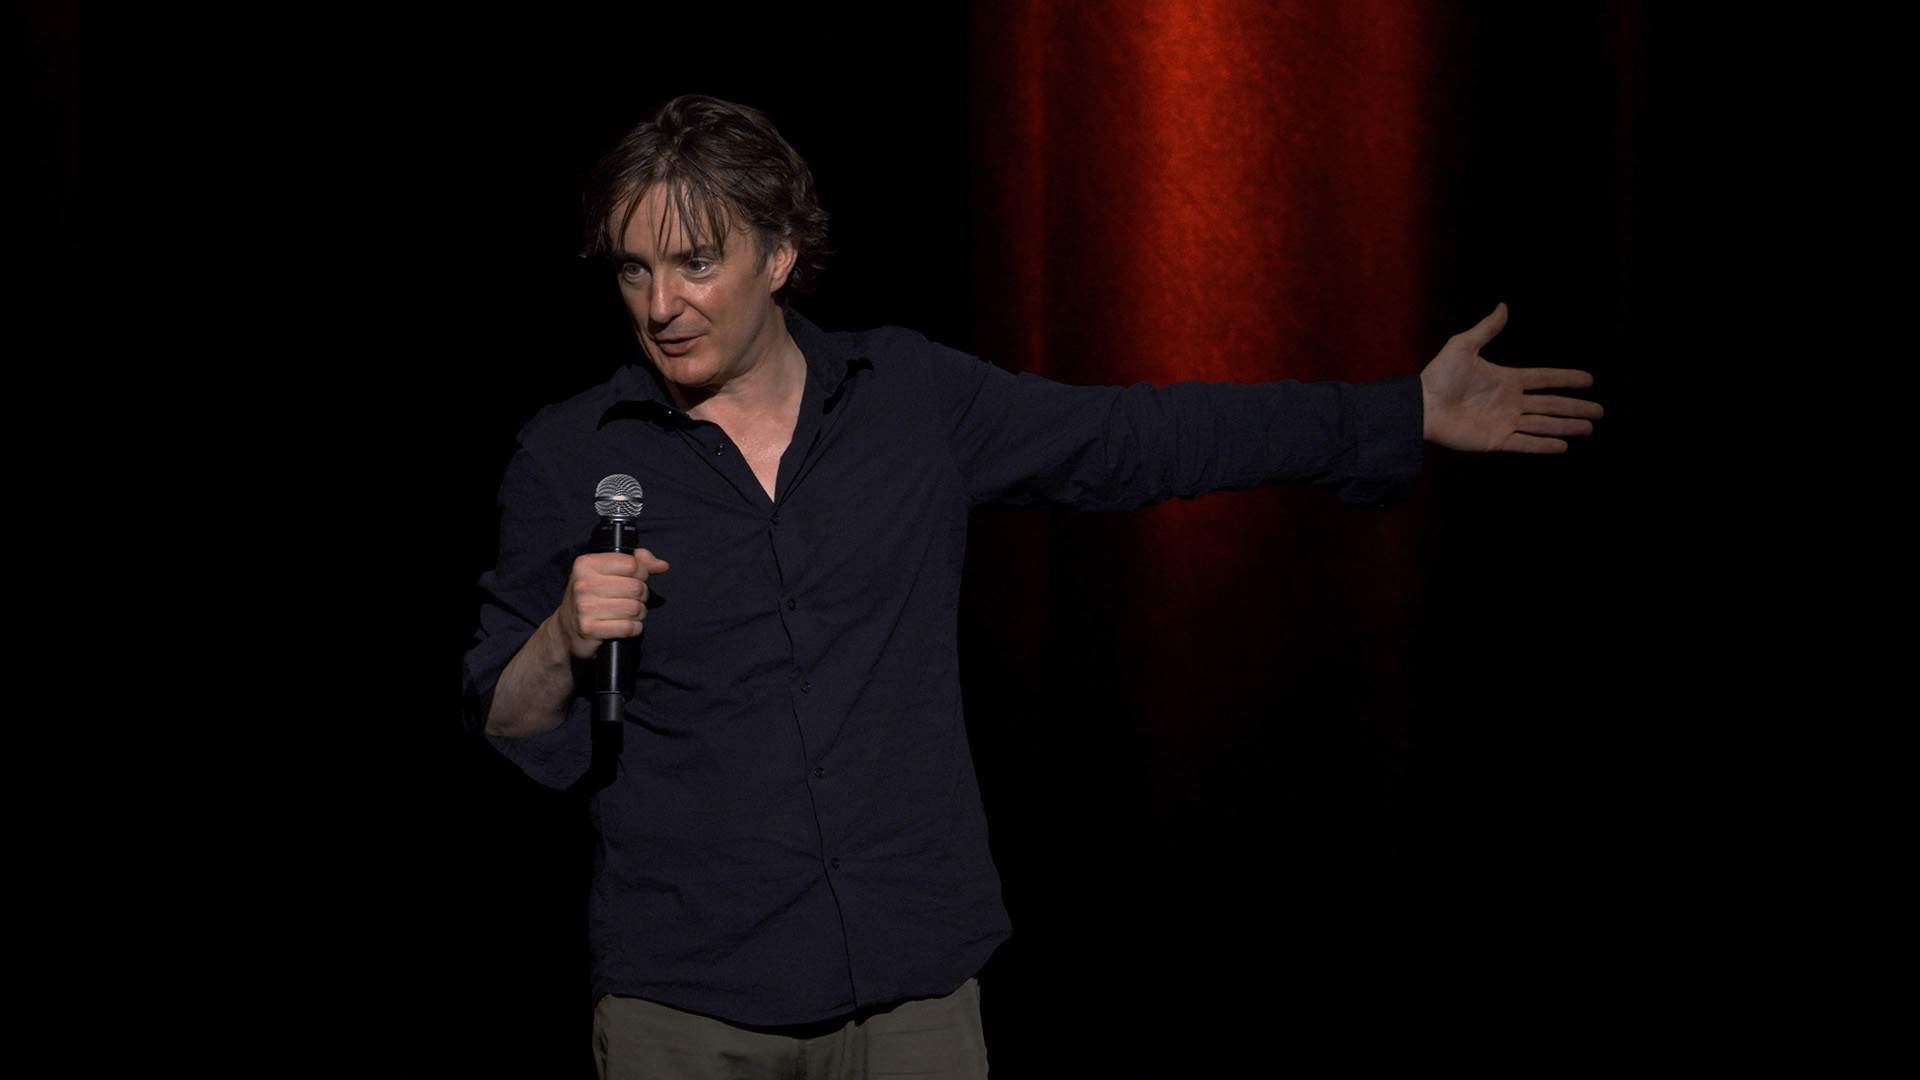 Dylan Moran Is Bringing His Latest Comedy Show to Australia and New Zealand in 2023